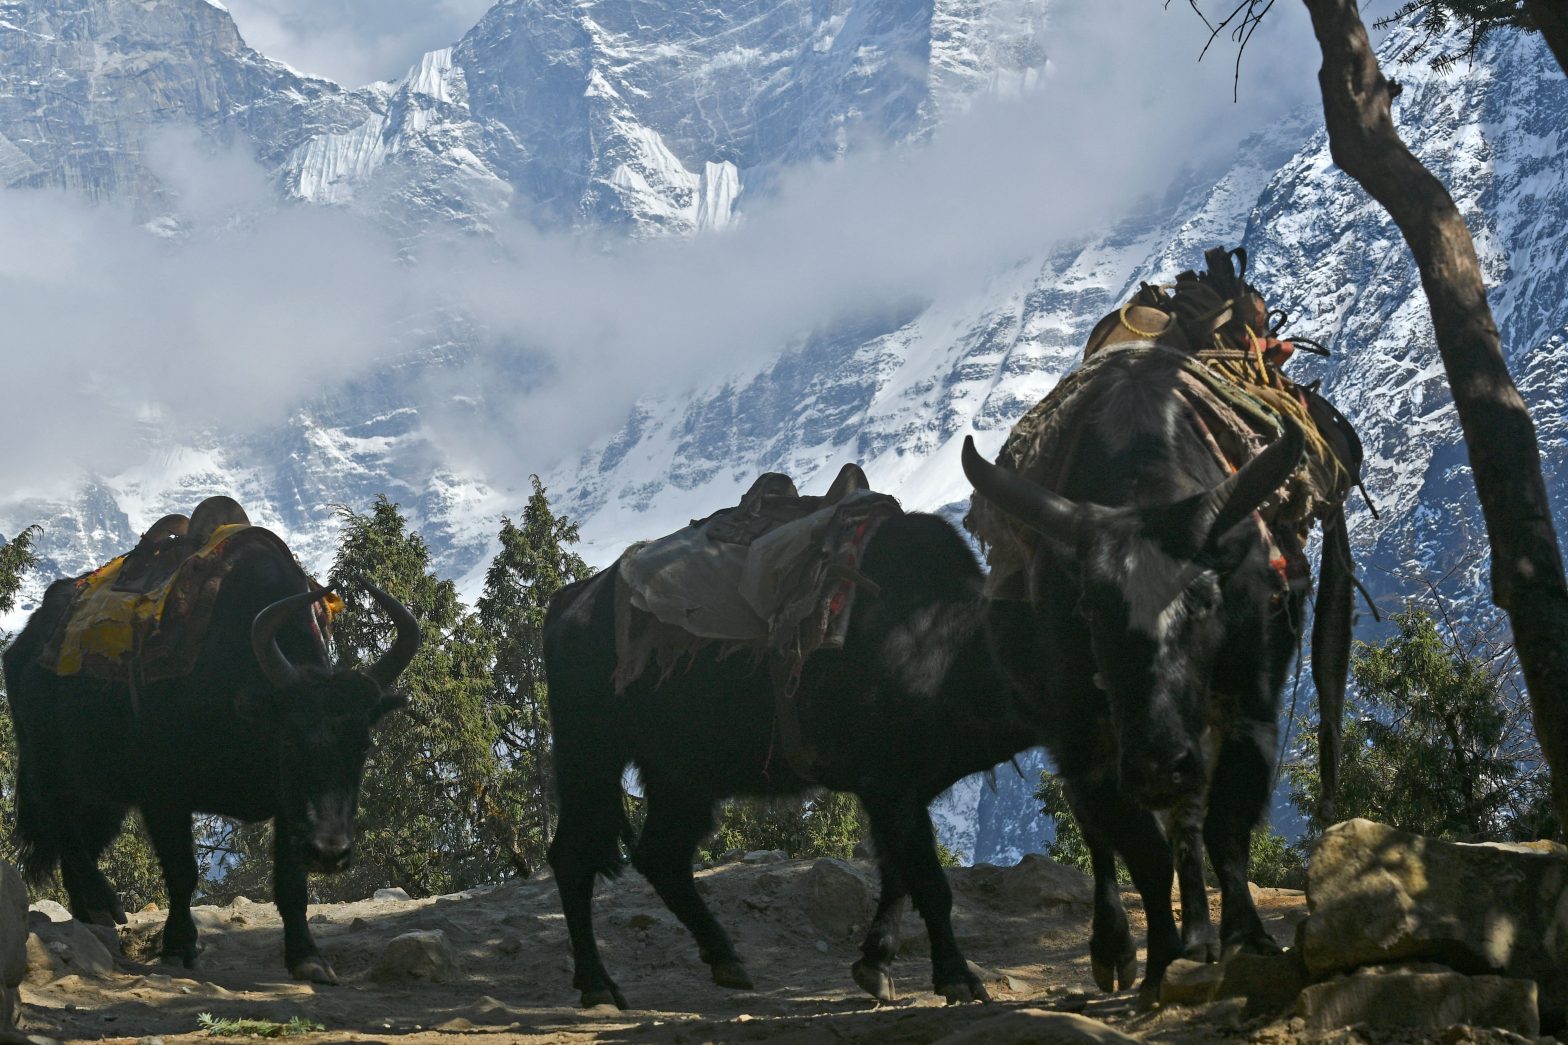 Domestic yaks carry goods